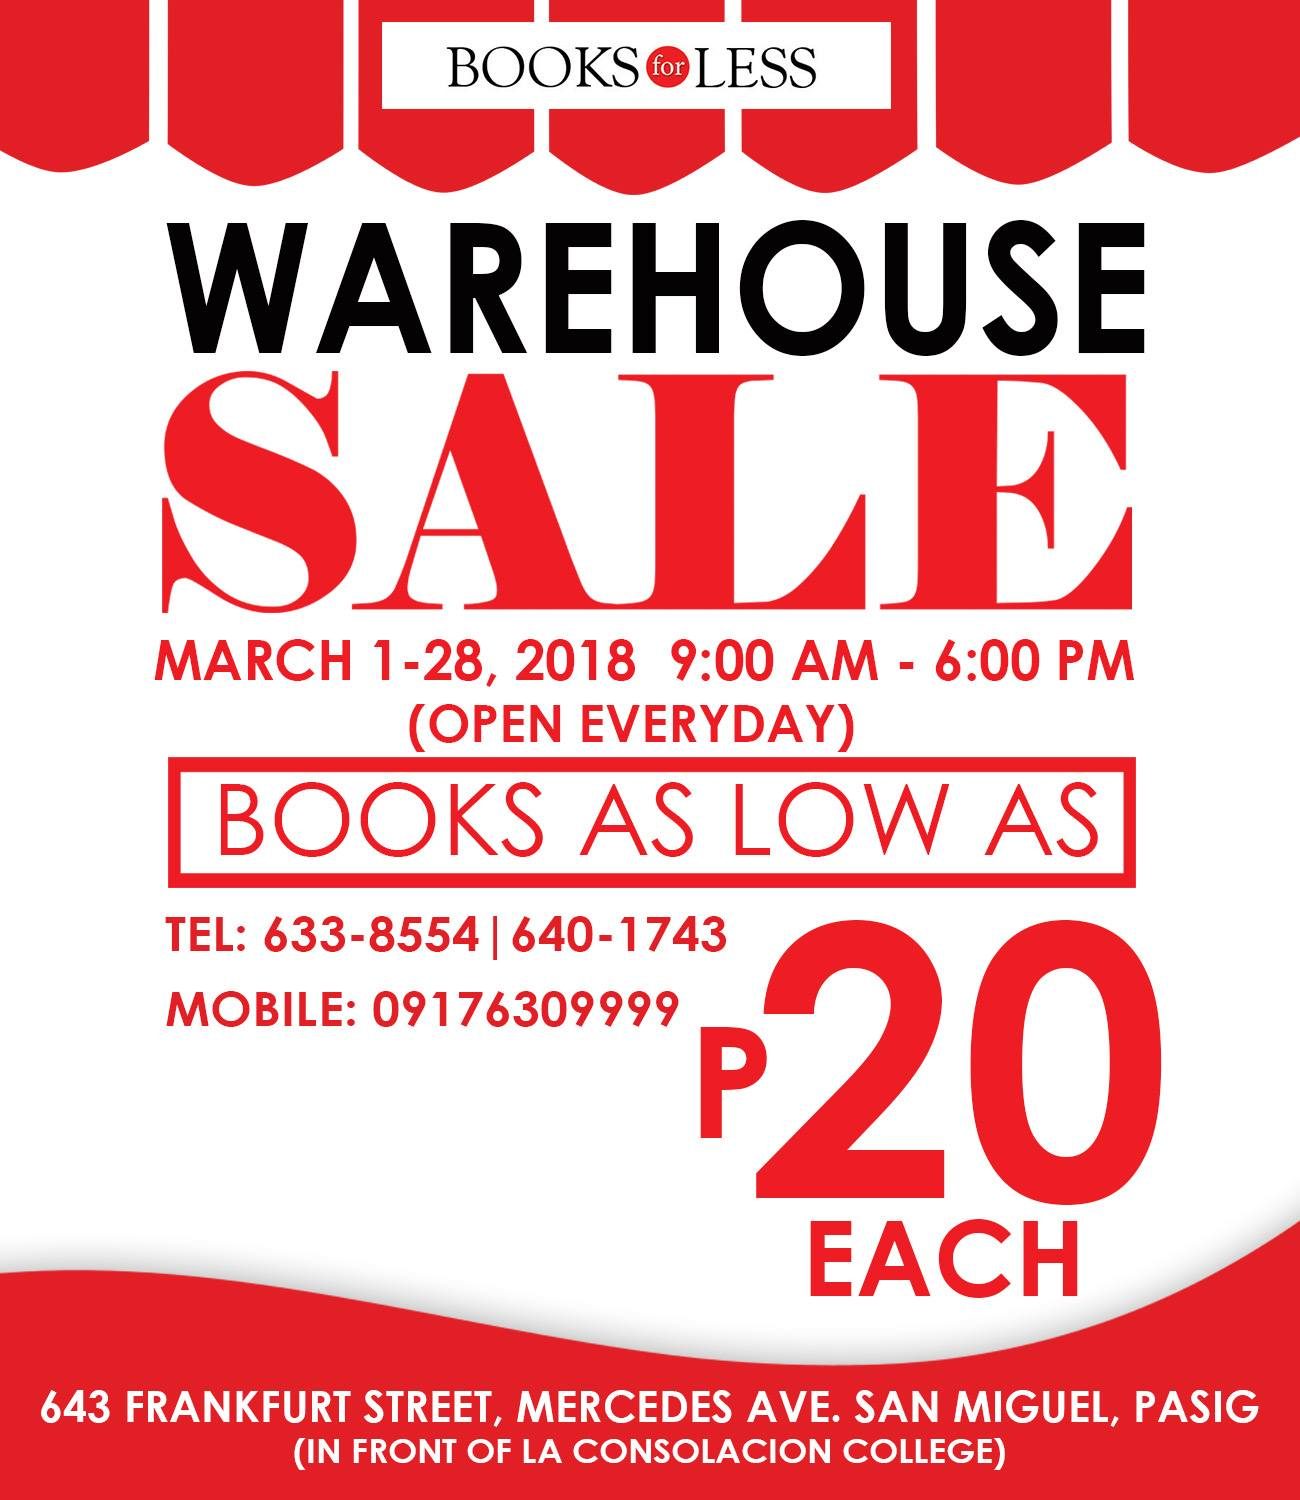 BOOK SALE. Book for Less is set to have a warehouse sale starting March 1. Photo from Facebook/BookforLess Bookstore 